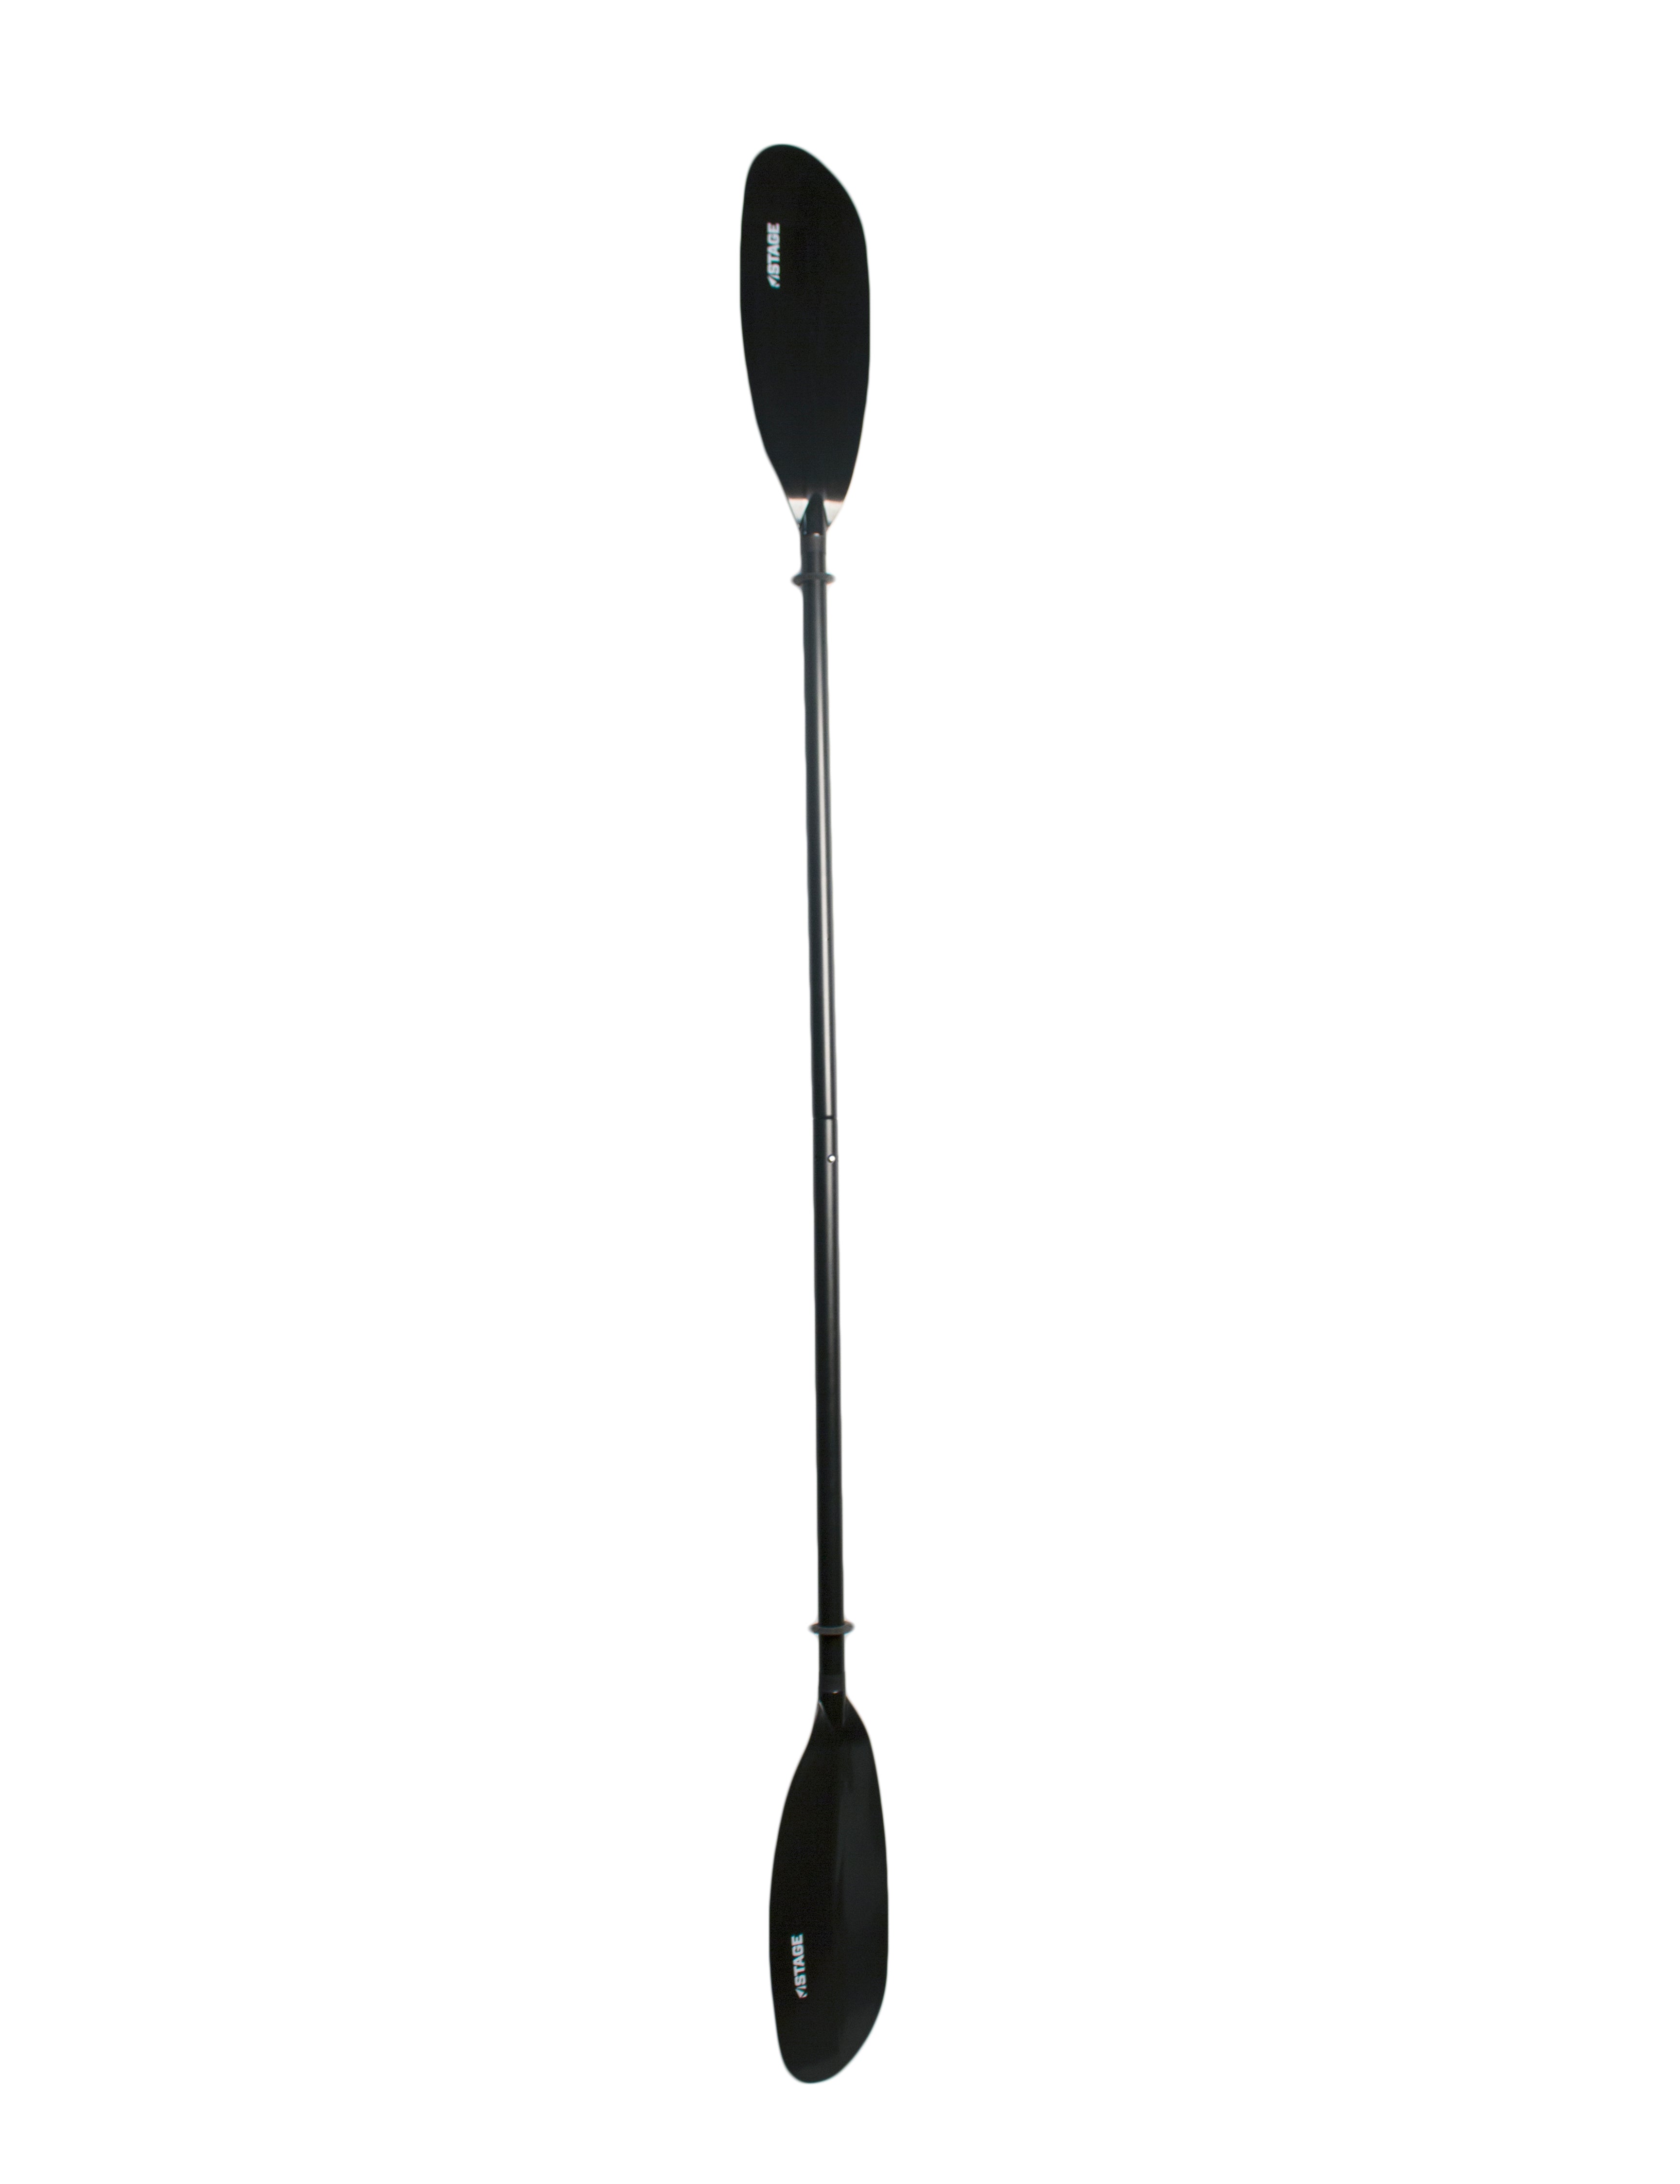 STAGE 2-Piece Aluminum Kayak Paddle in Black. This aluminum kayak paddle is lightweight and easy to use